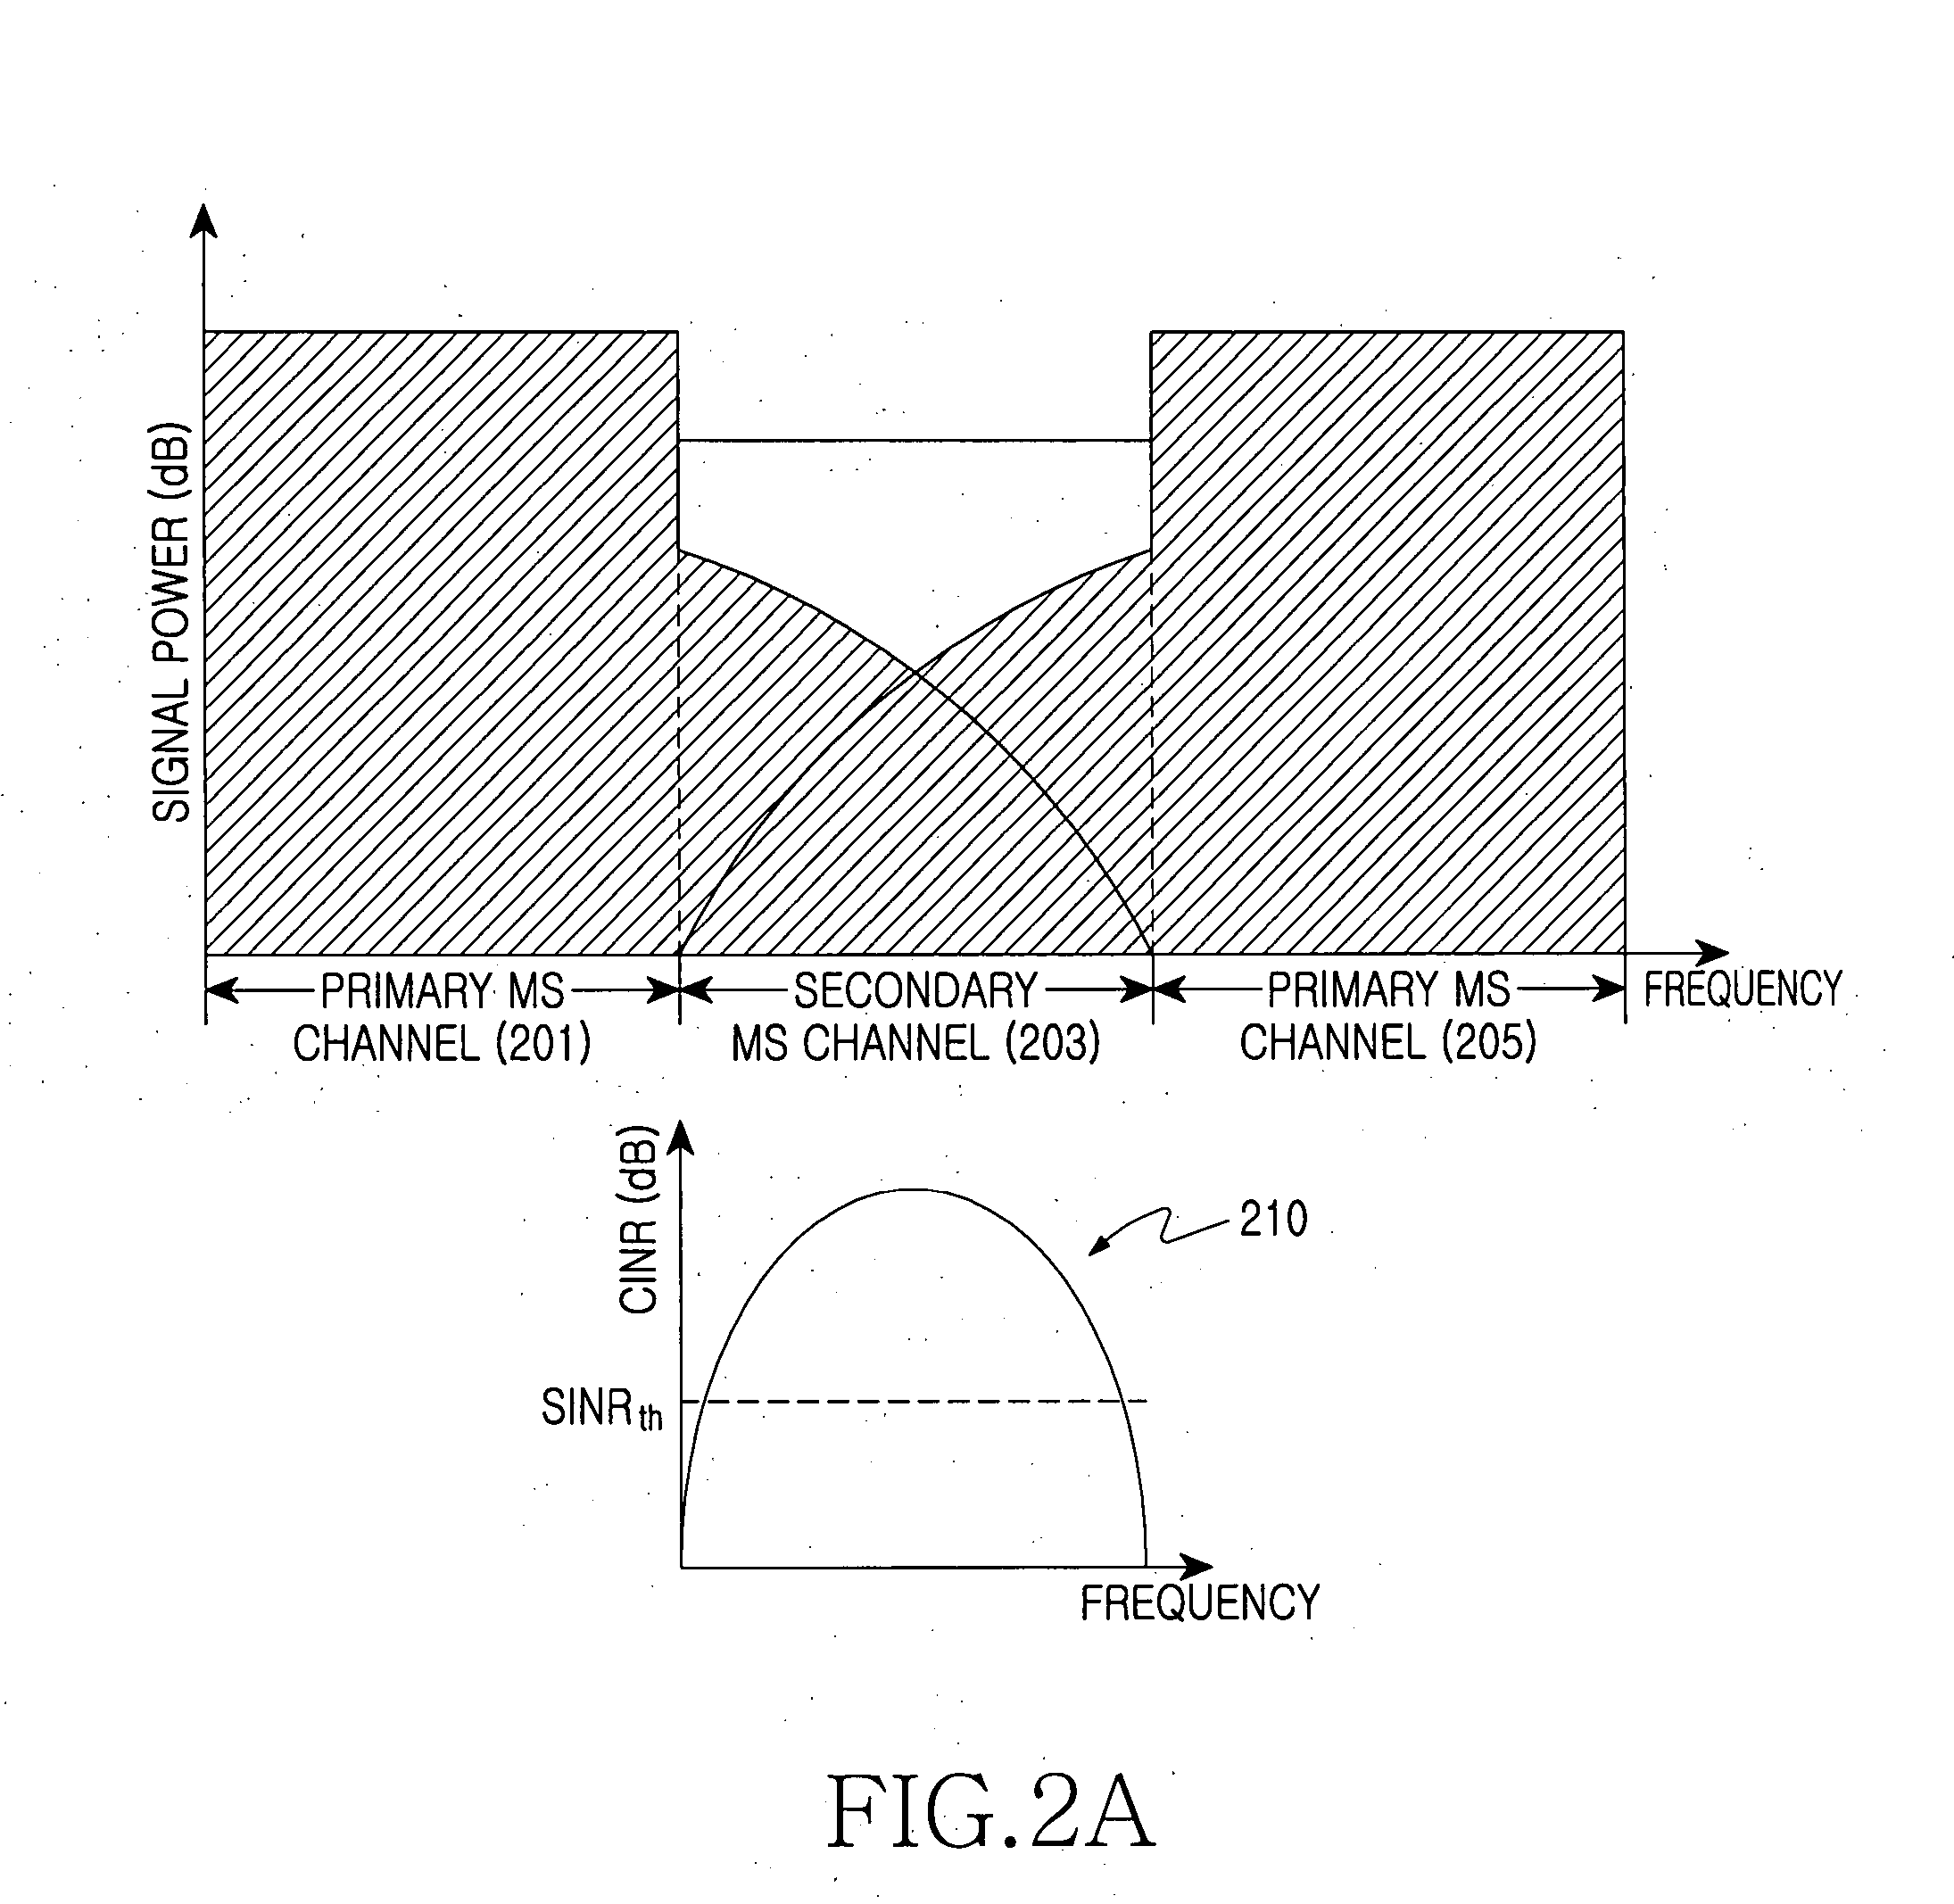 Method and system for transmitting/receiving data in a communication system